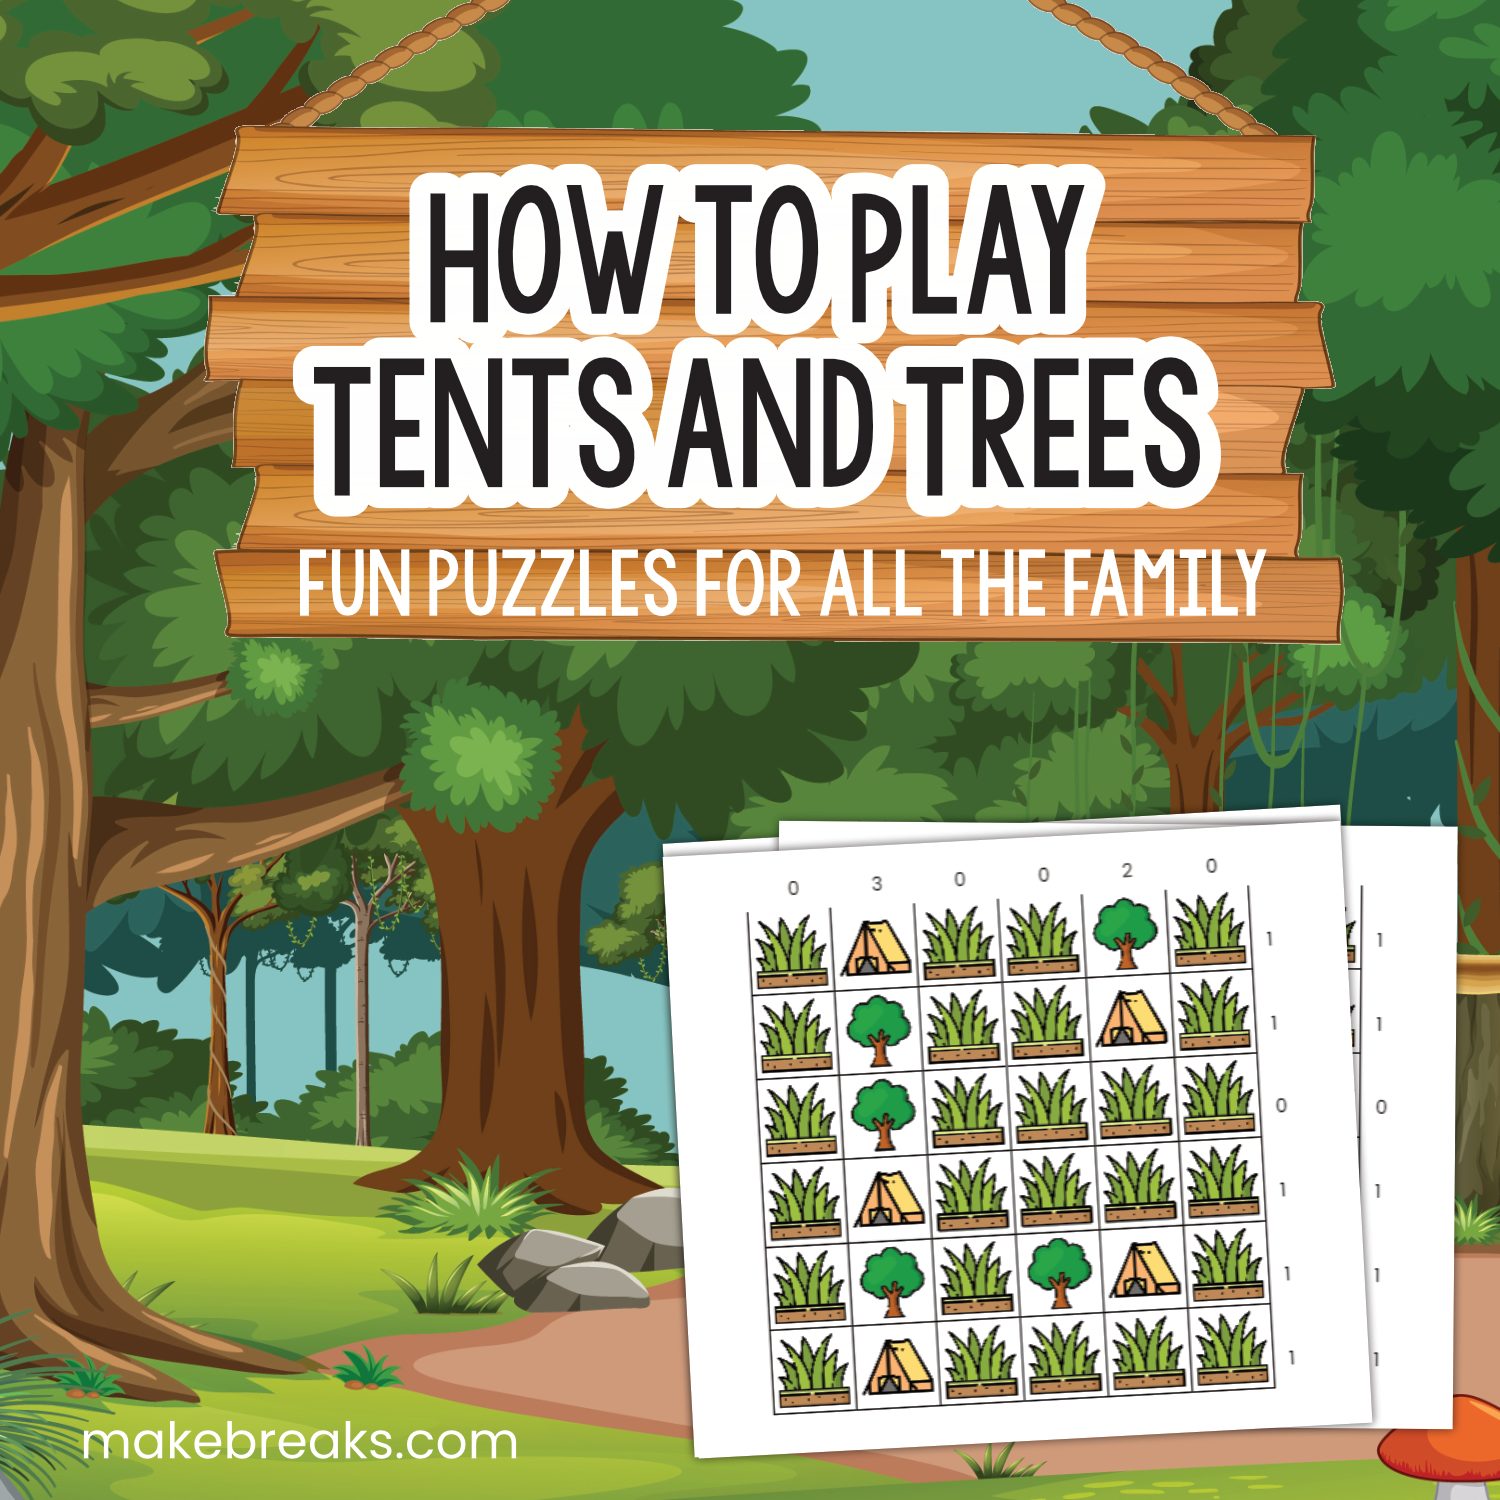 How to Play Tents and Trees Puzzle Game Walkthrough